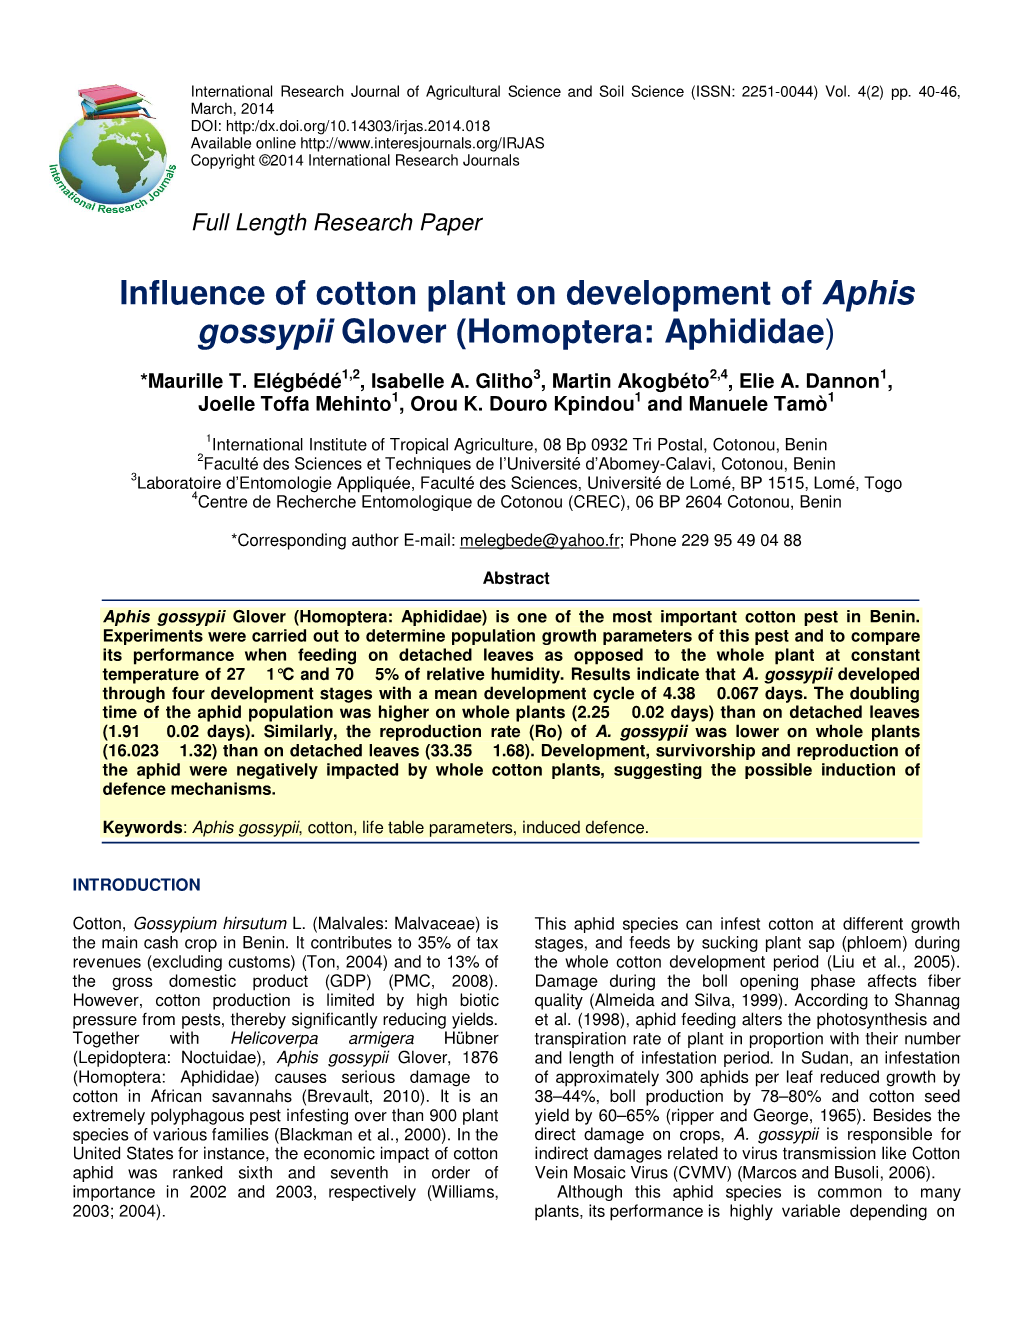 Influence of Cotton Plant on Development of Aphis Gossypii Glover (Homoptera: Aphididae )